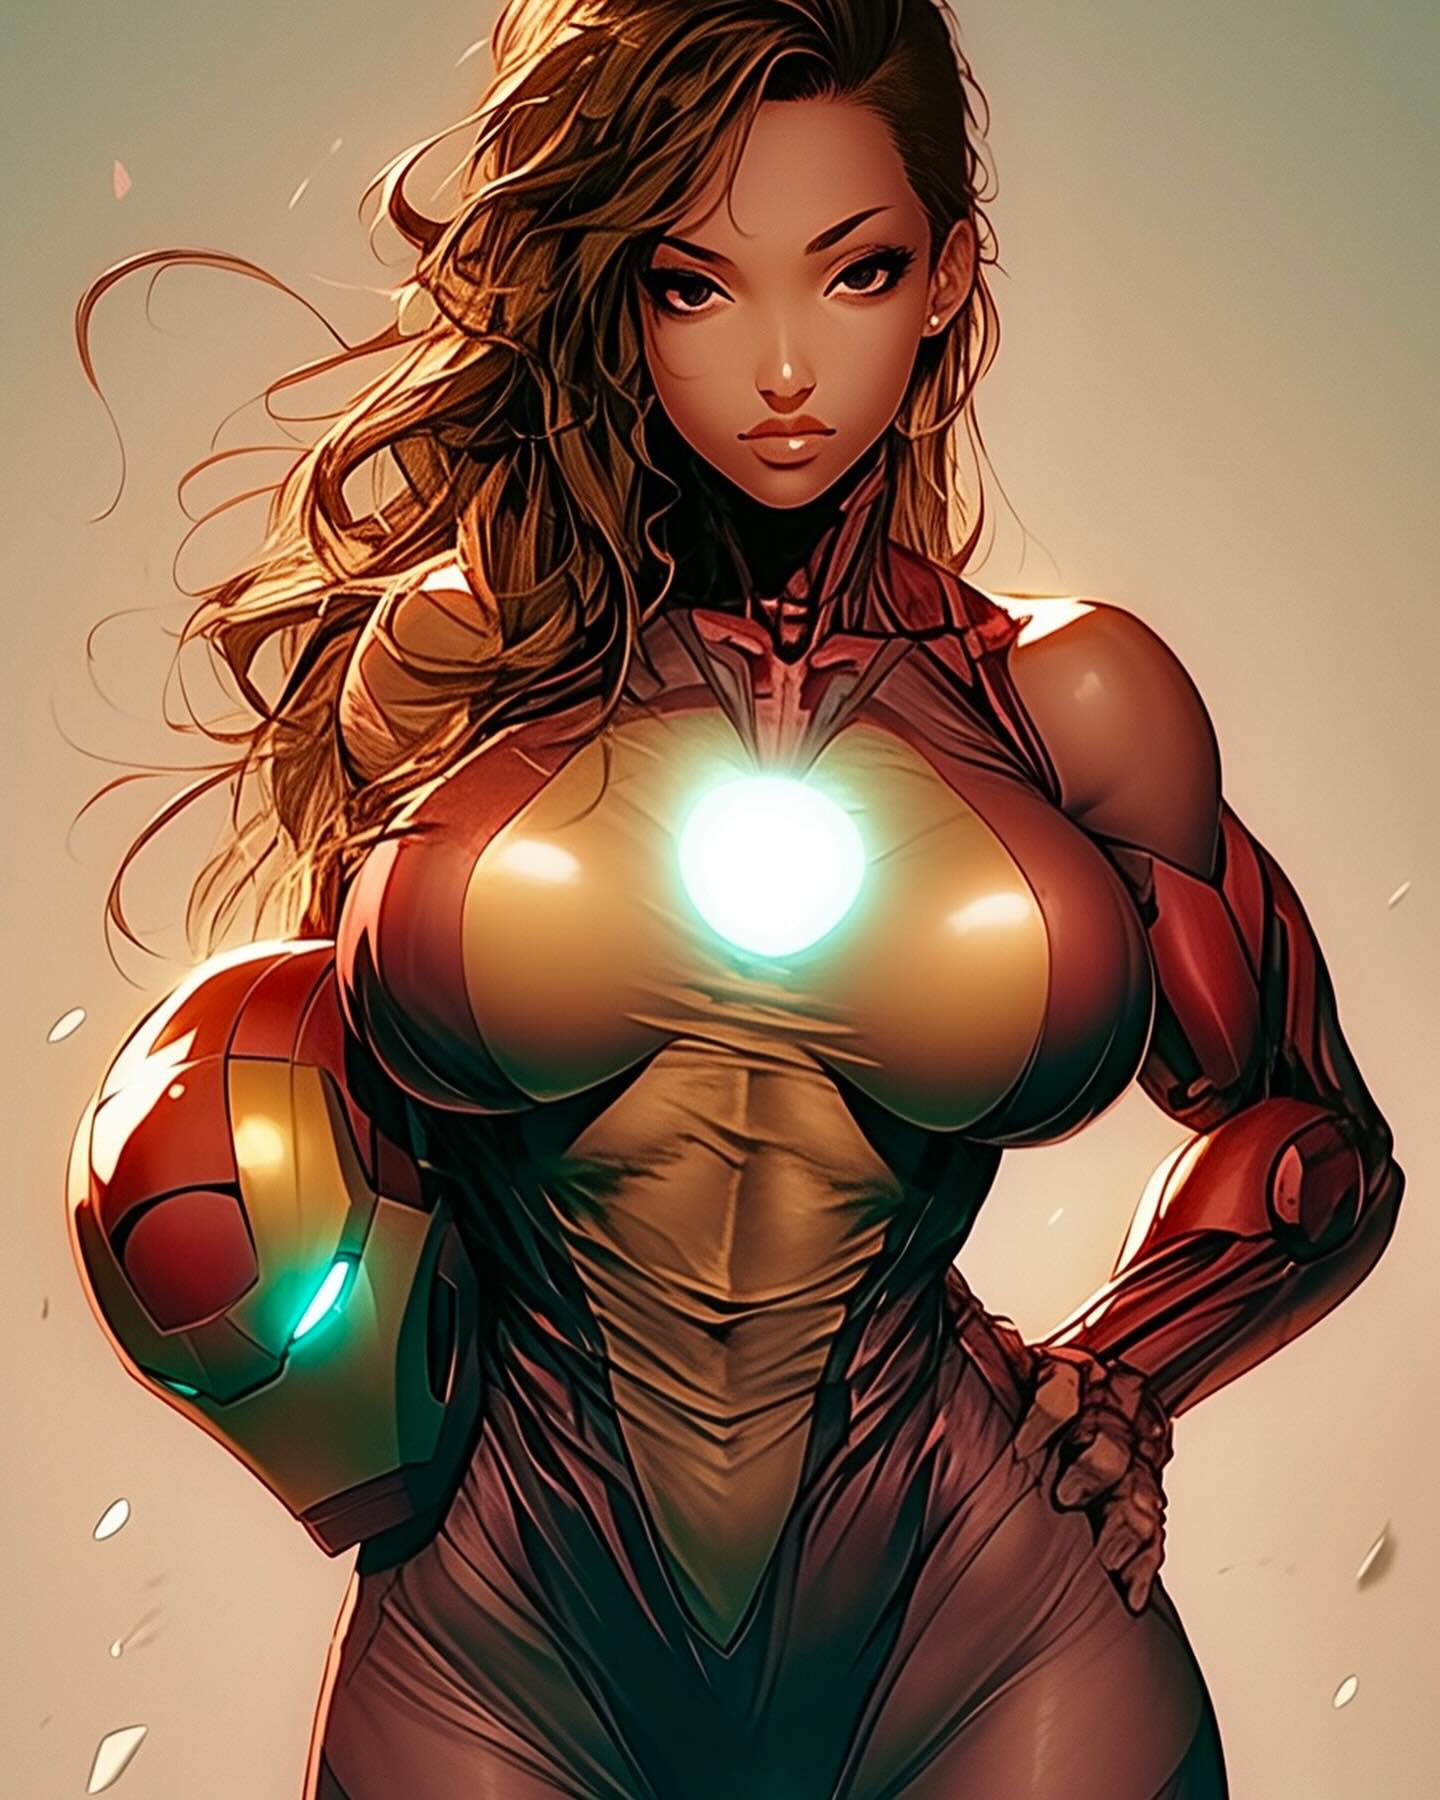 Ironheart by-434214690_17968302191705826_7515592411620461309_n 